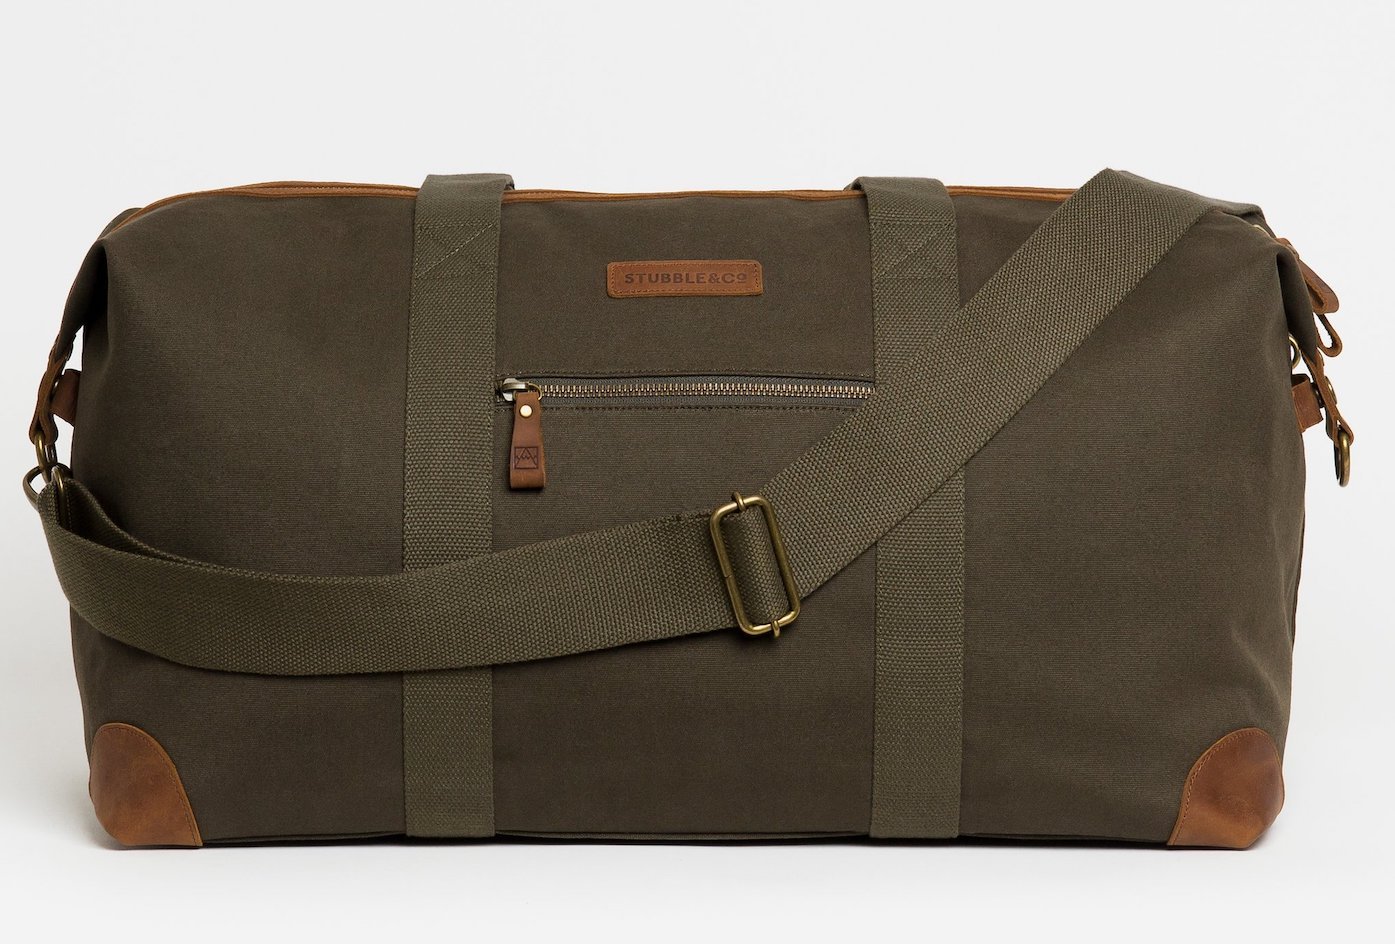 Weekender bag by Stubble & Co in olive